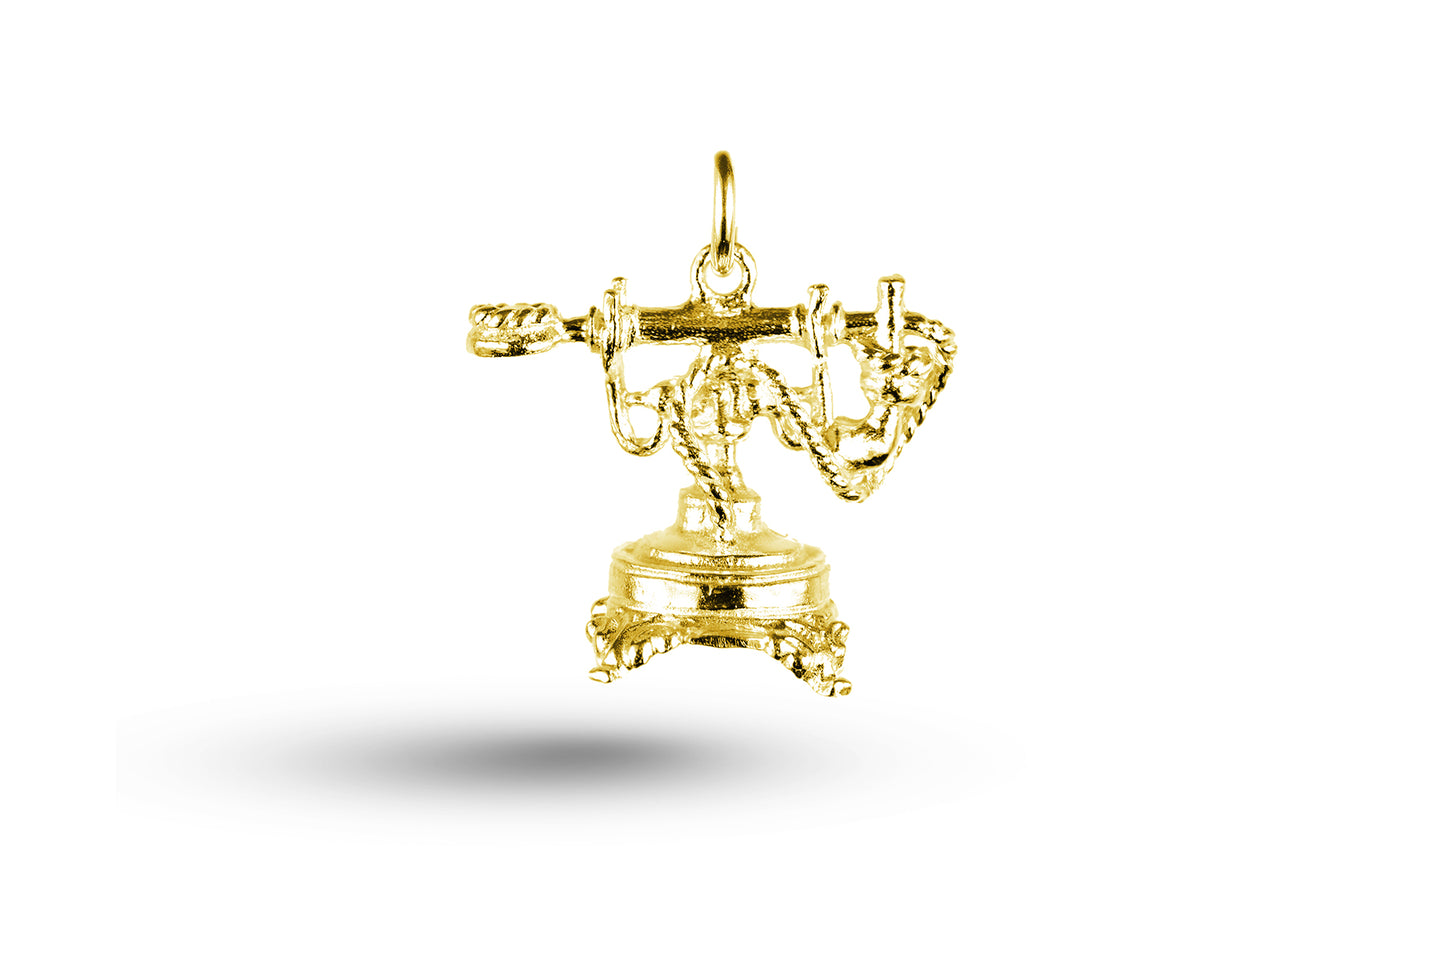 Yellow gold Old Fashioned Candlestick Telephone charm.